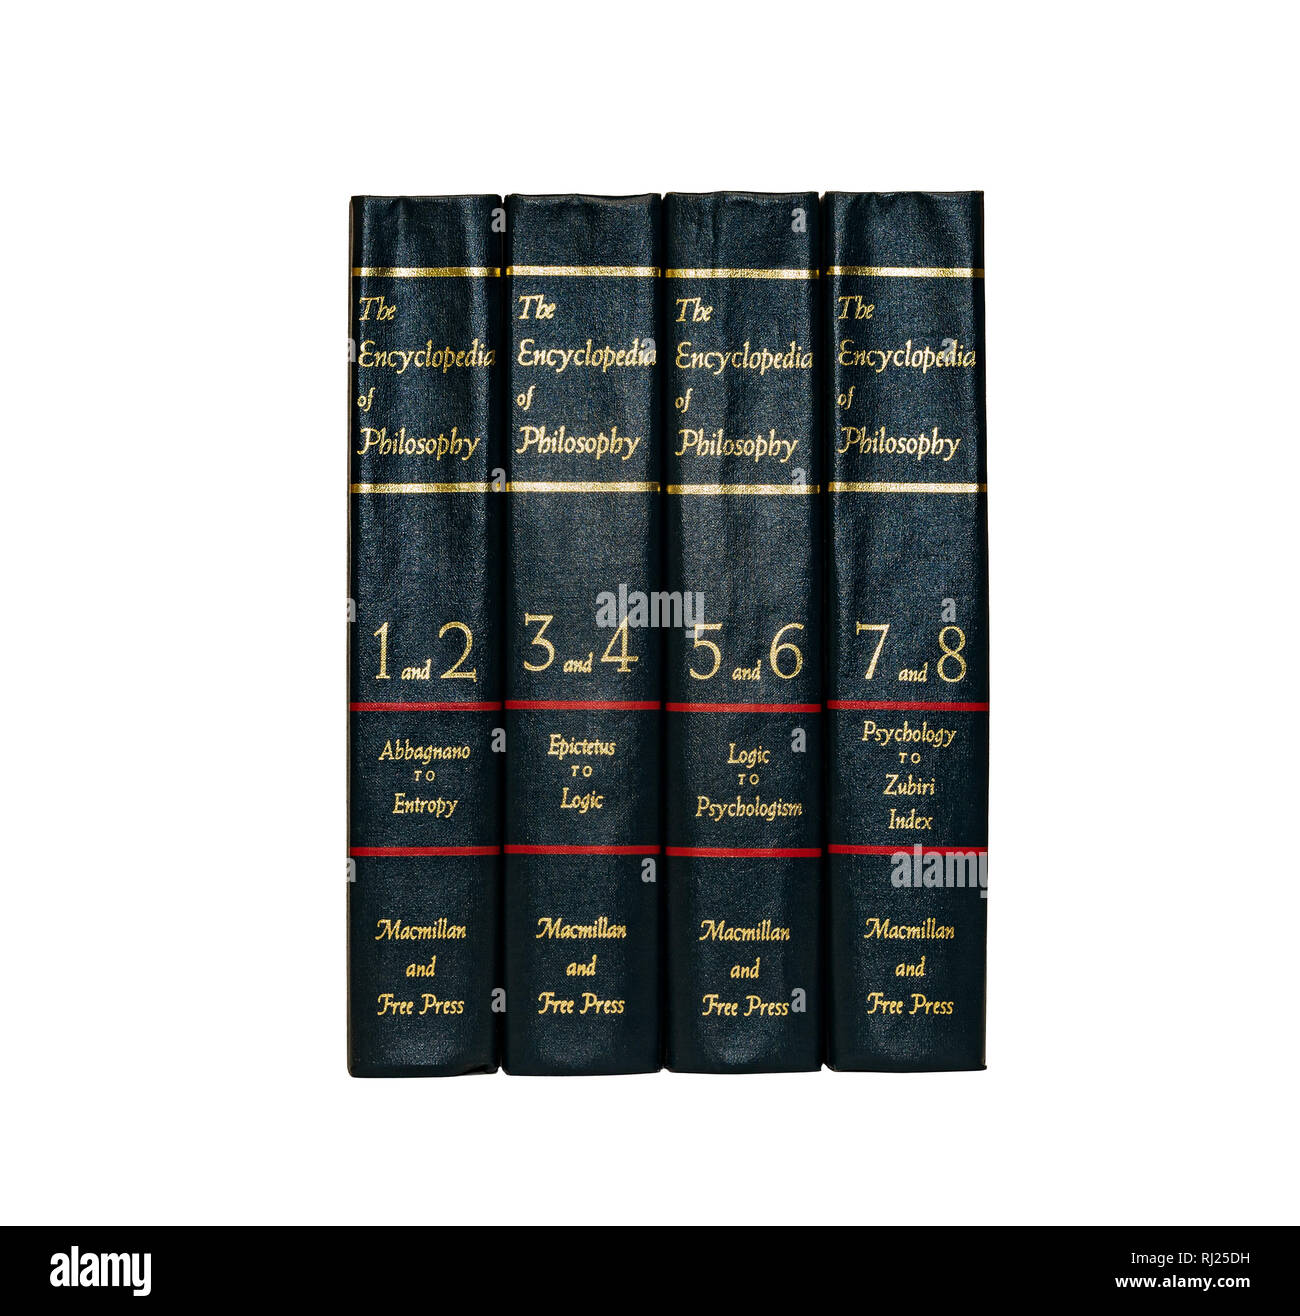 Book image: The Encyclopedia of Philosophy, Eight volumes in four books, Paul Edwards, editor-in-chief, spines showing.  Isolated on white background. Stock Photo